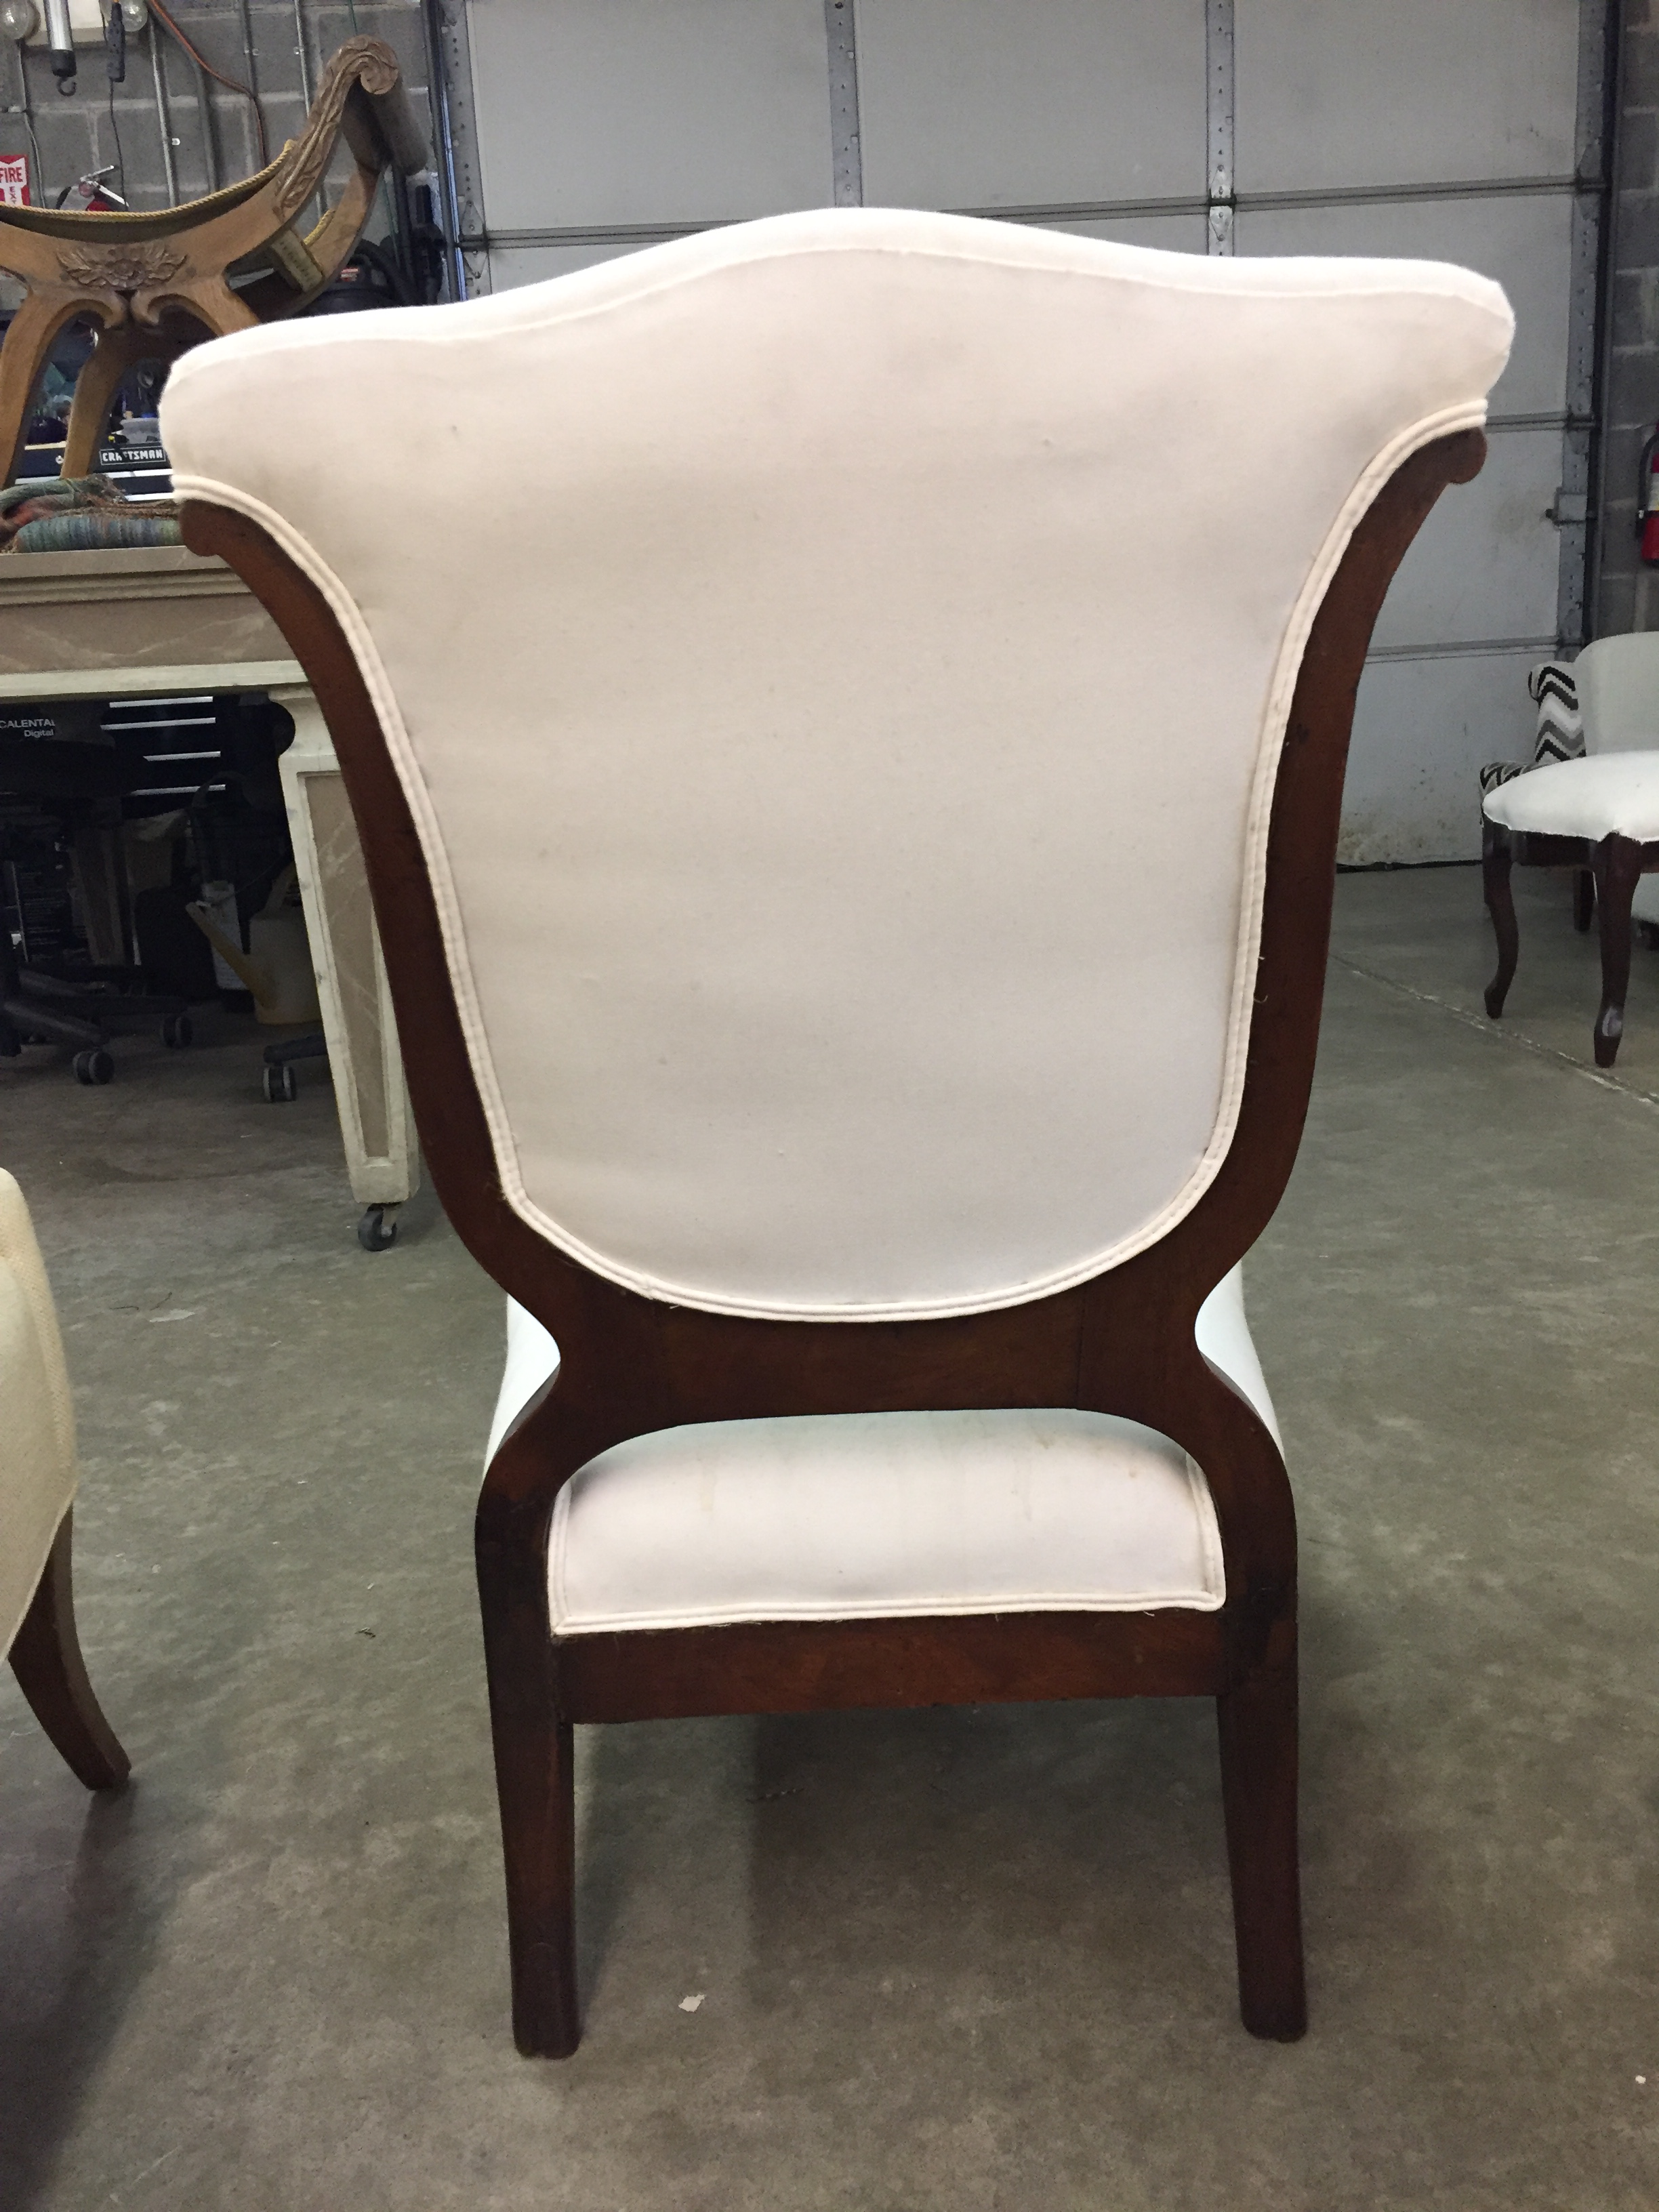 Before & After: "The Yes Chair" for IFDA Take a Seat | Kelly Rogers Interiors | Interiors for Families